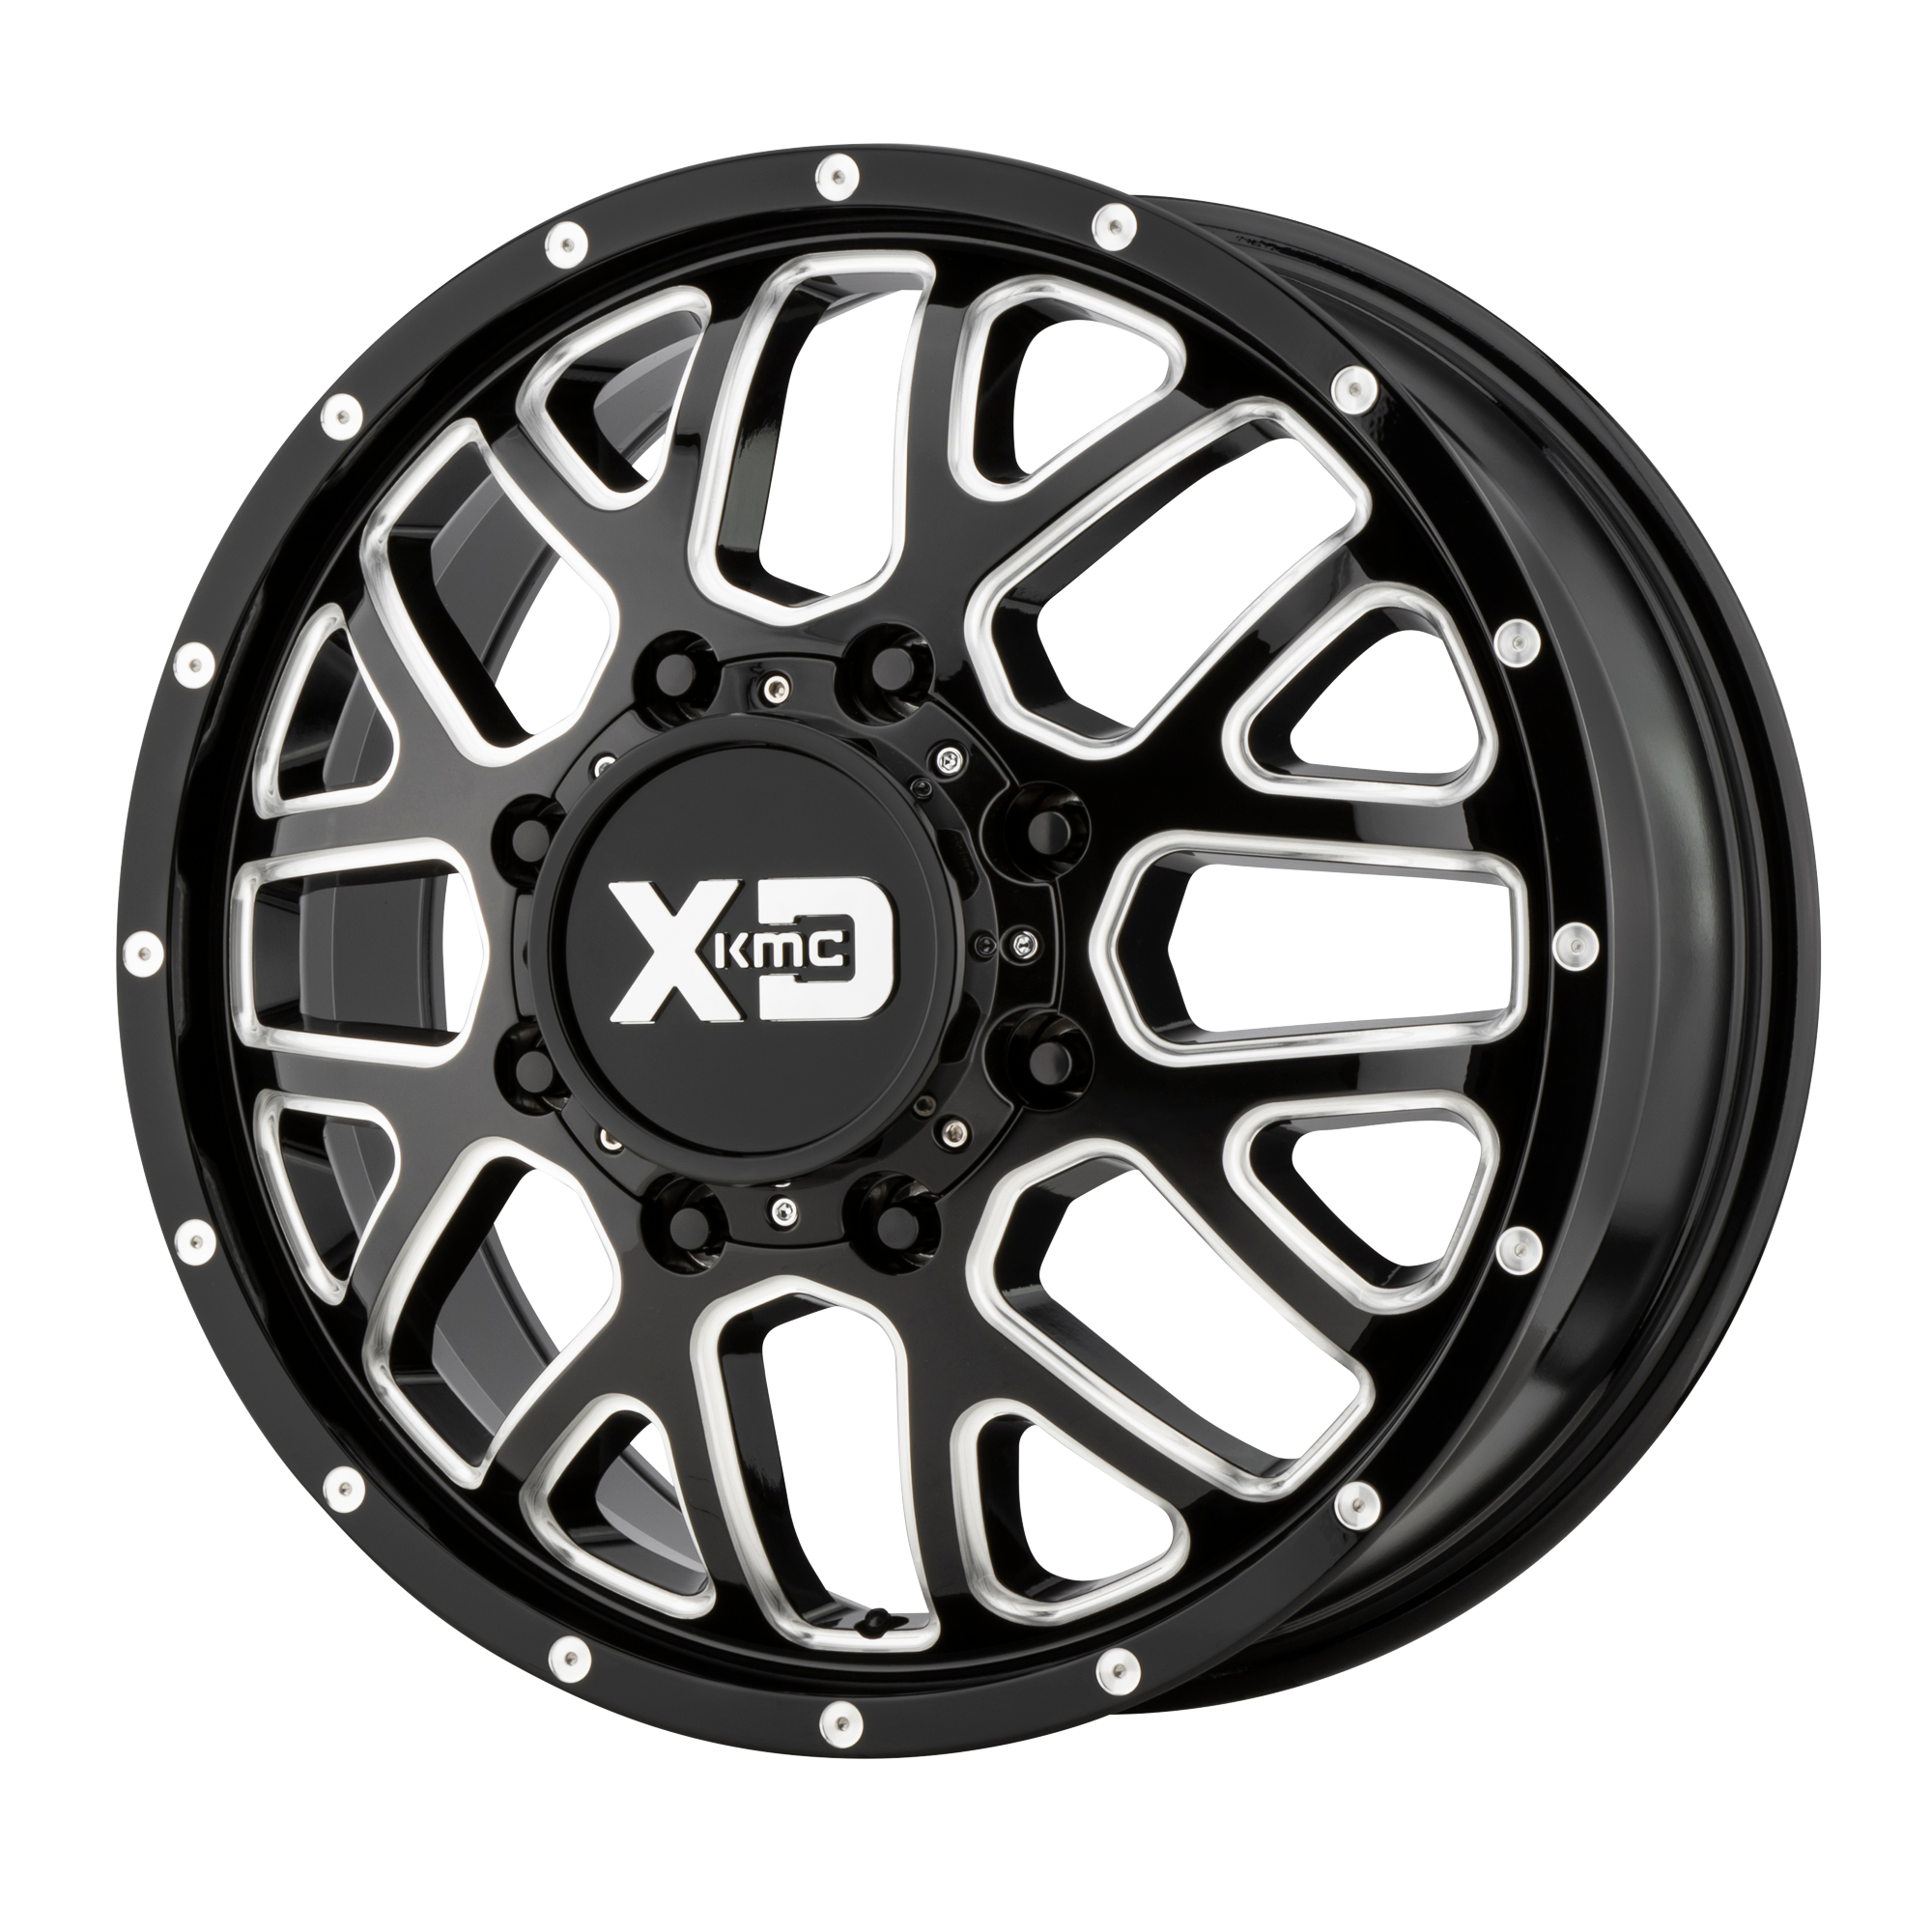 XD Series XD843 GRENADE DUALLY Gloss Black Milled - Front